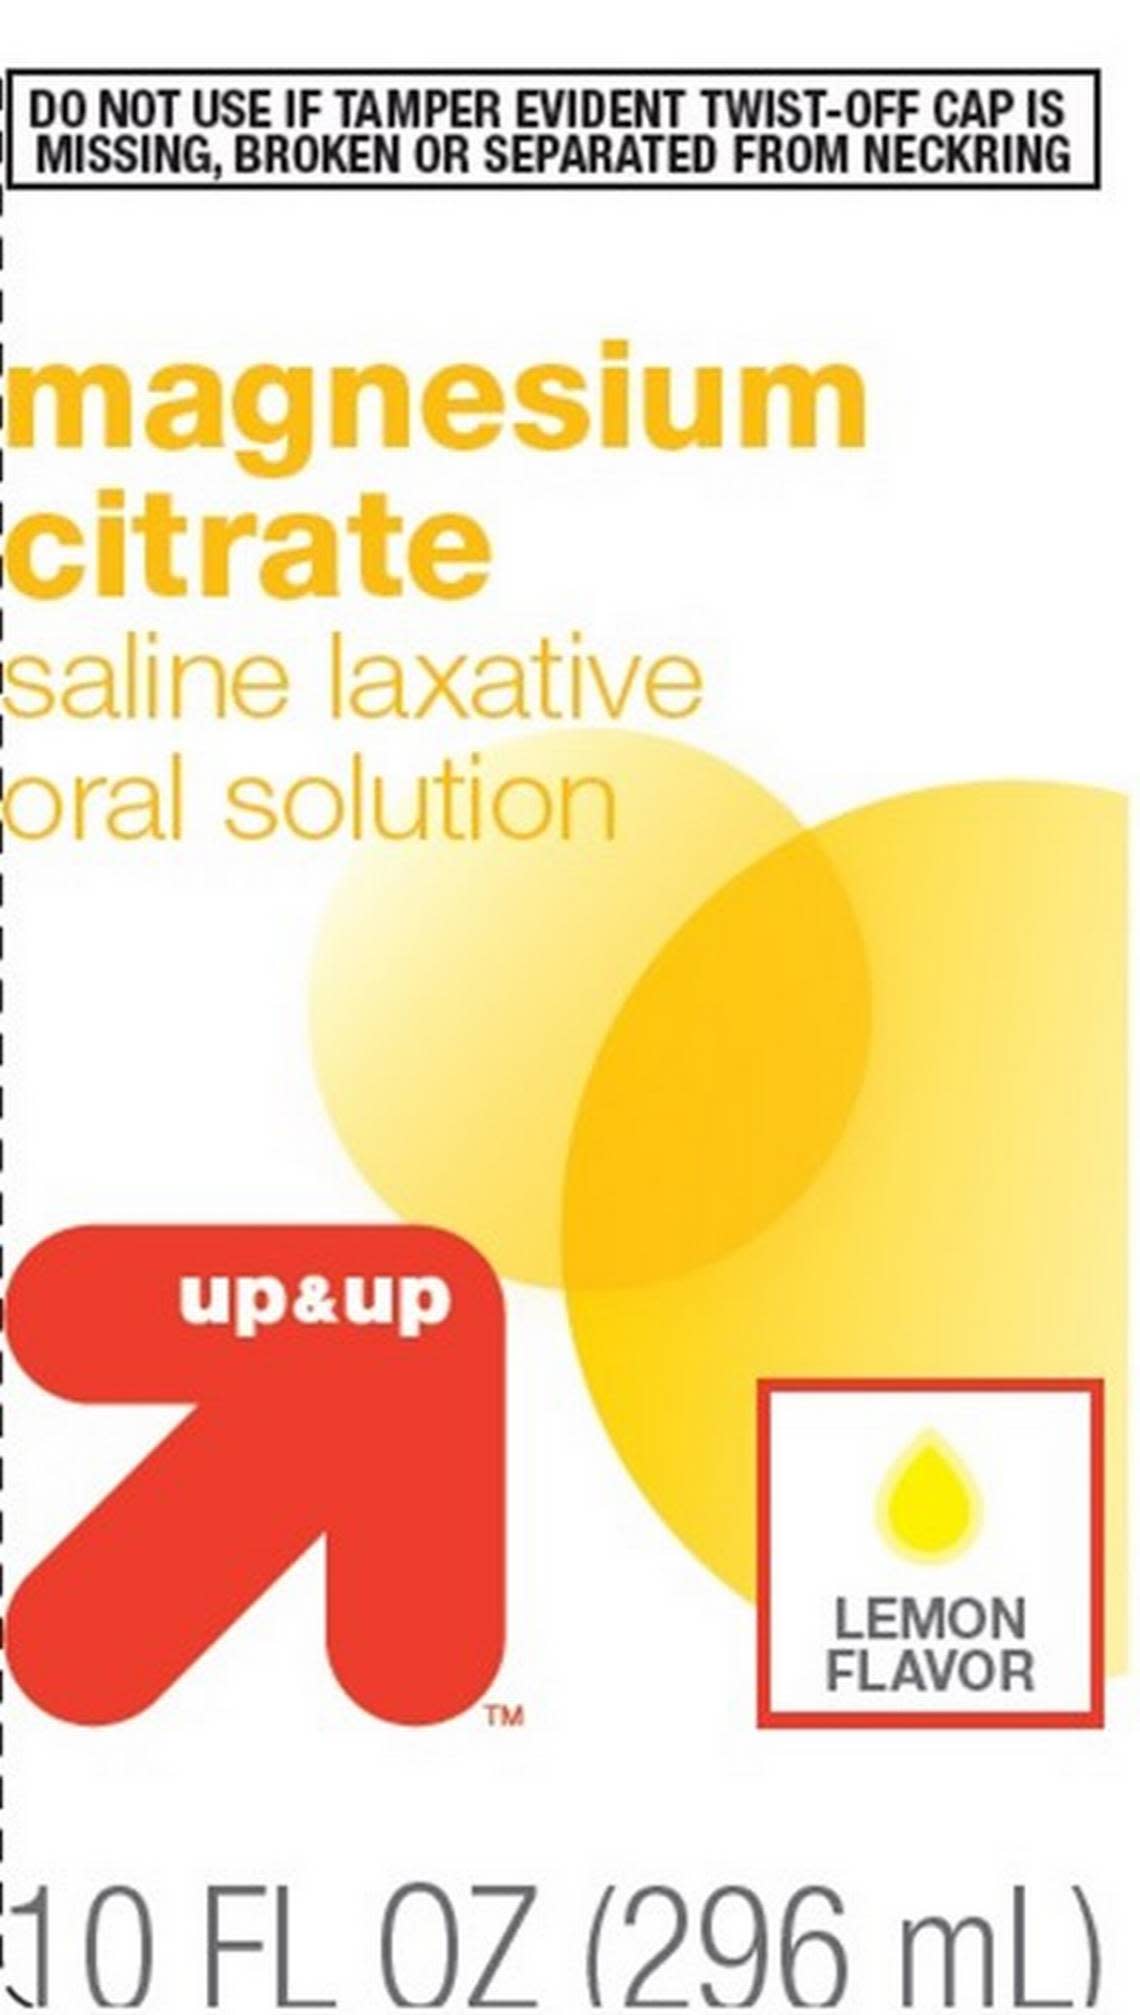 Target’s Up&Up brand of Magnesium Citrate laxative